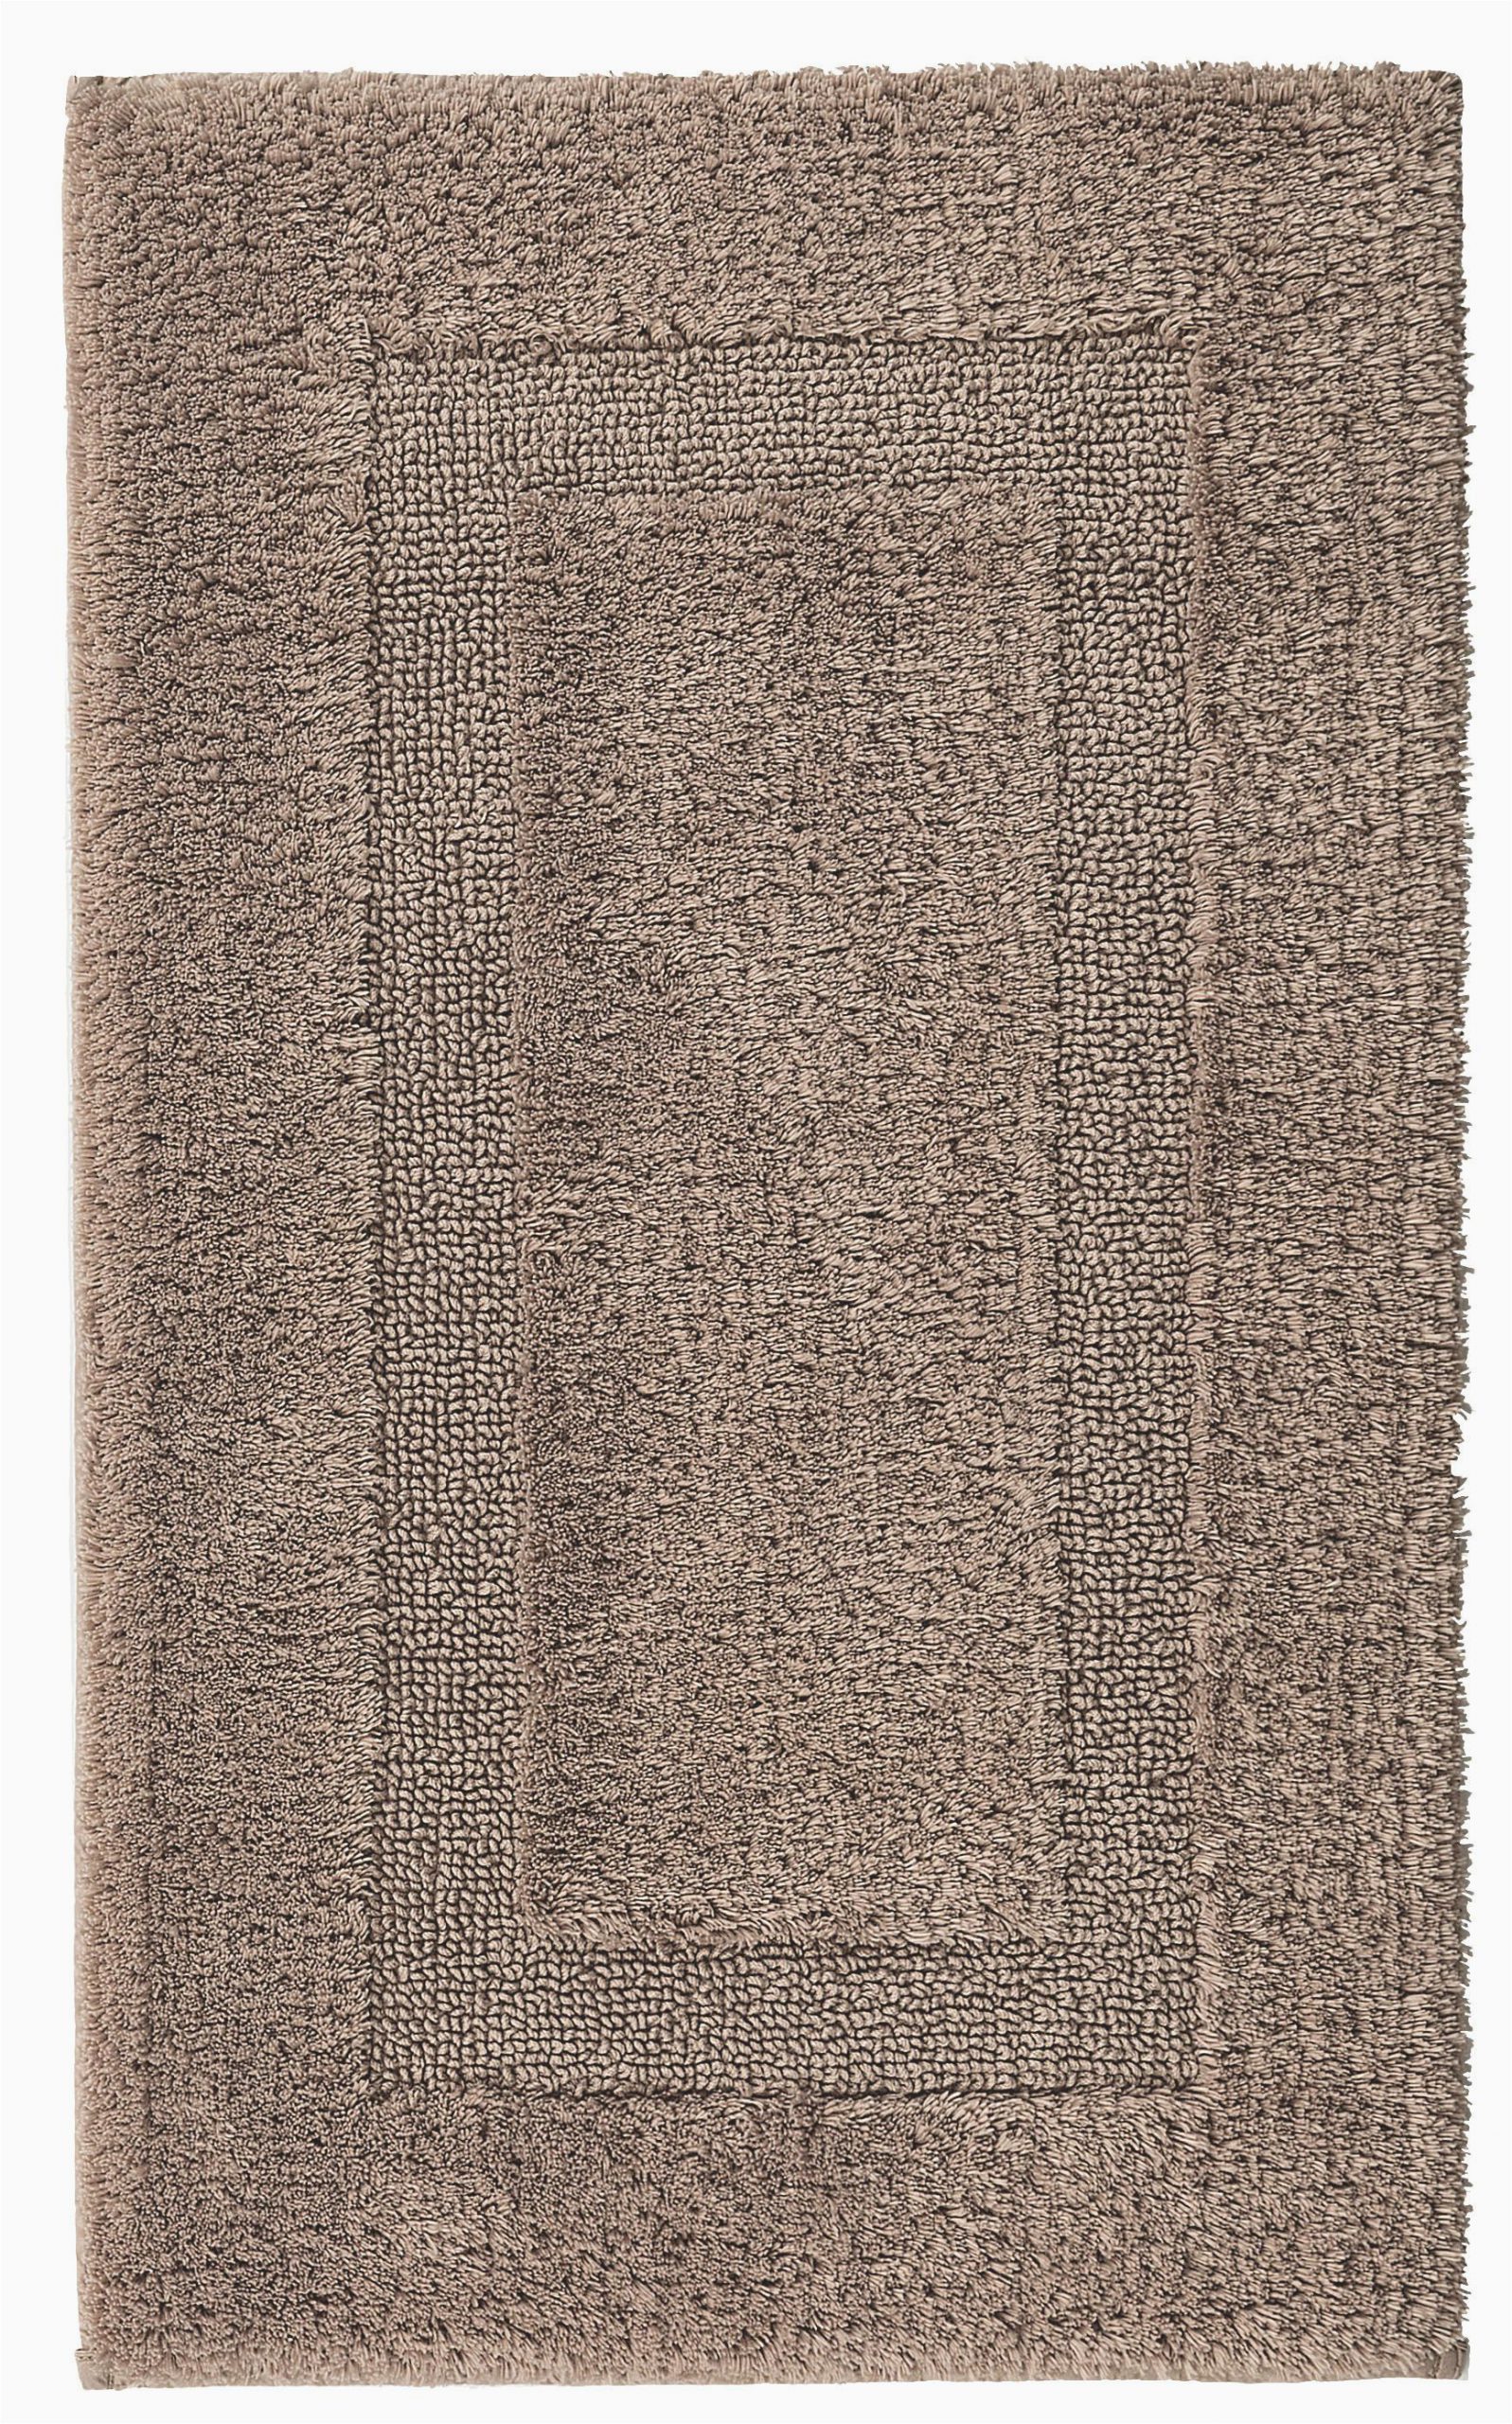 Thick Reversible Bath Rugs Classic Reversible Bath Mat In Stone Heaven to Step Out